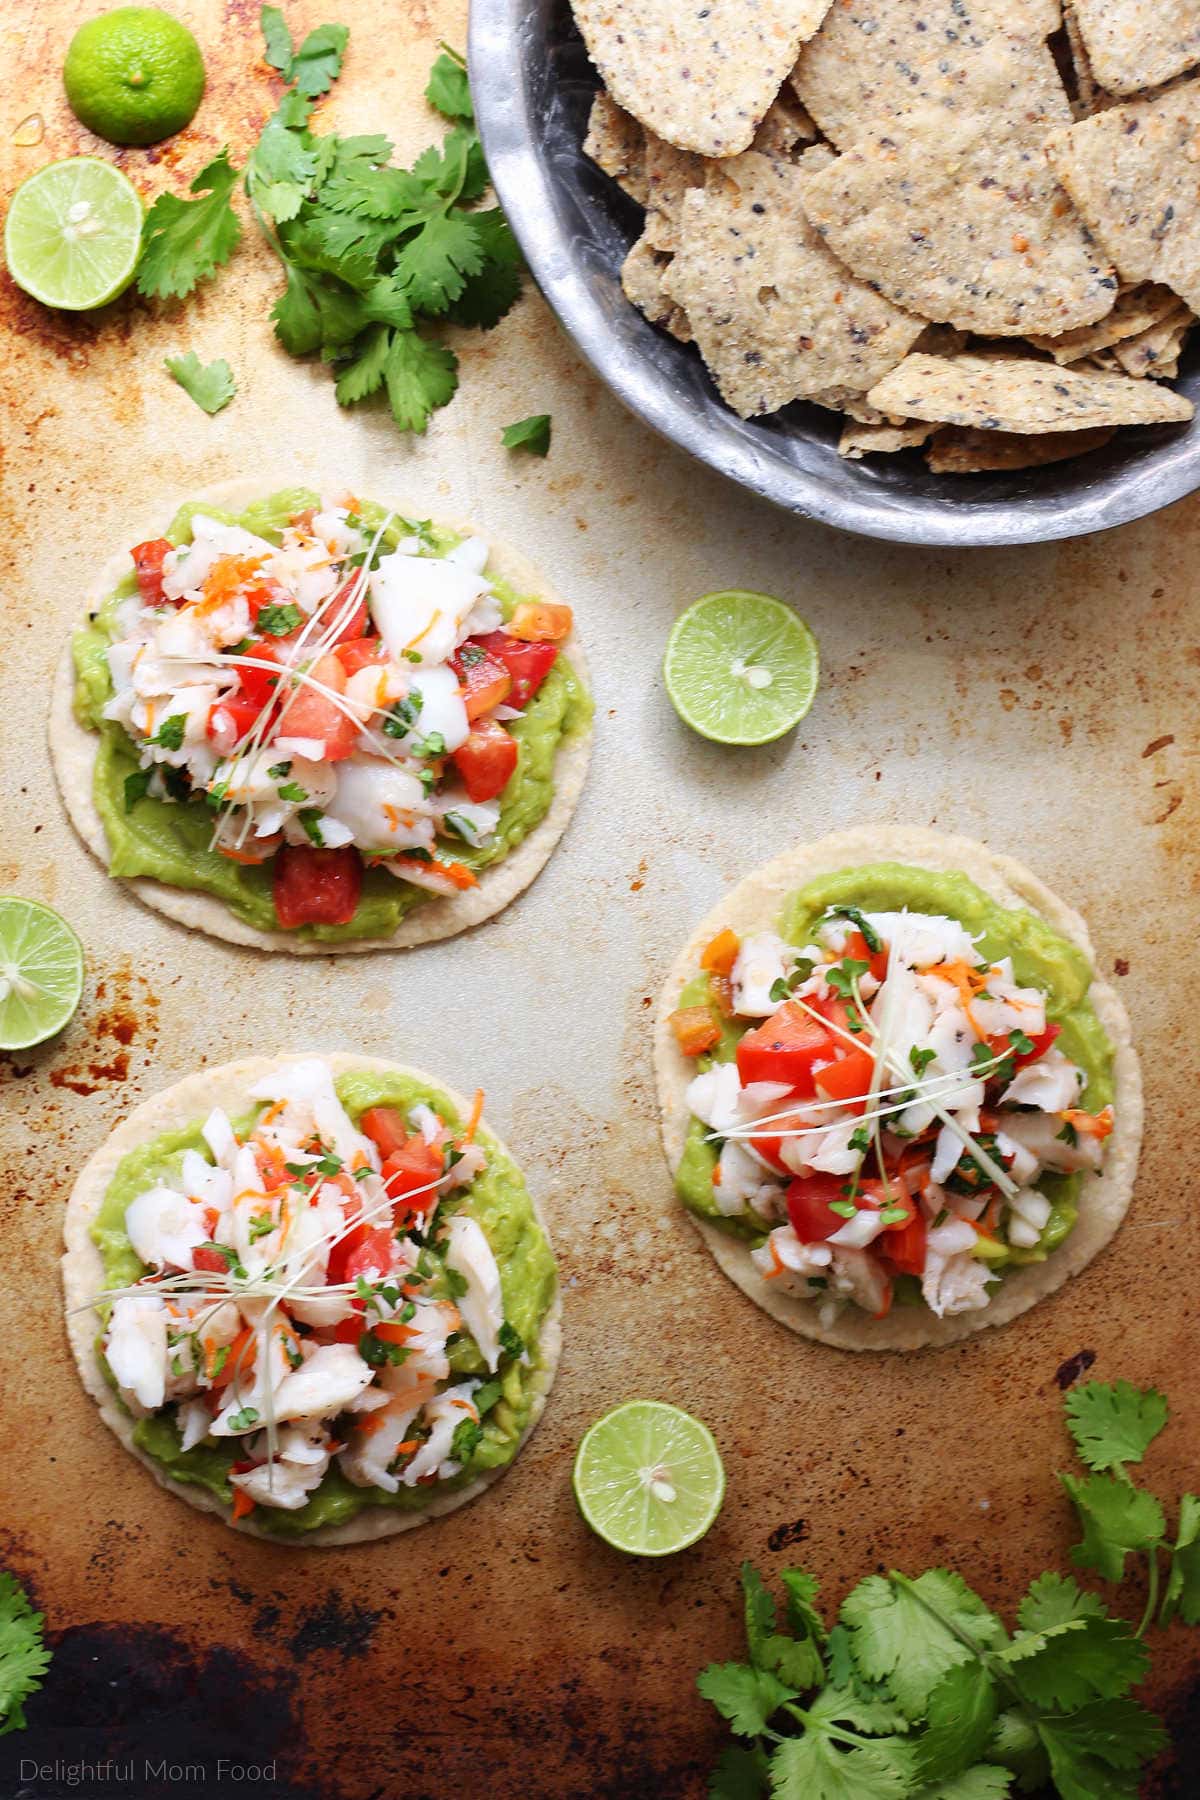 ceviche recipe made raw or cooked using halibut or cod fish served on a corn tortilla with guacamole on a plate